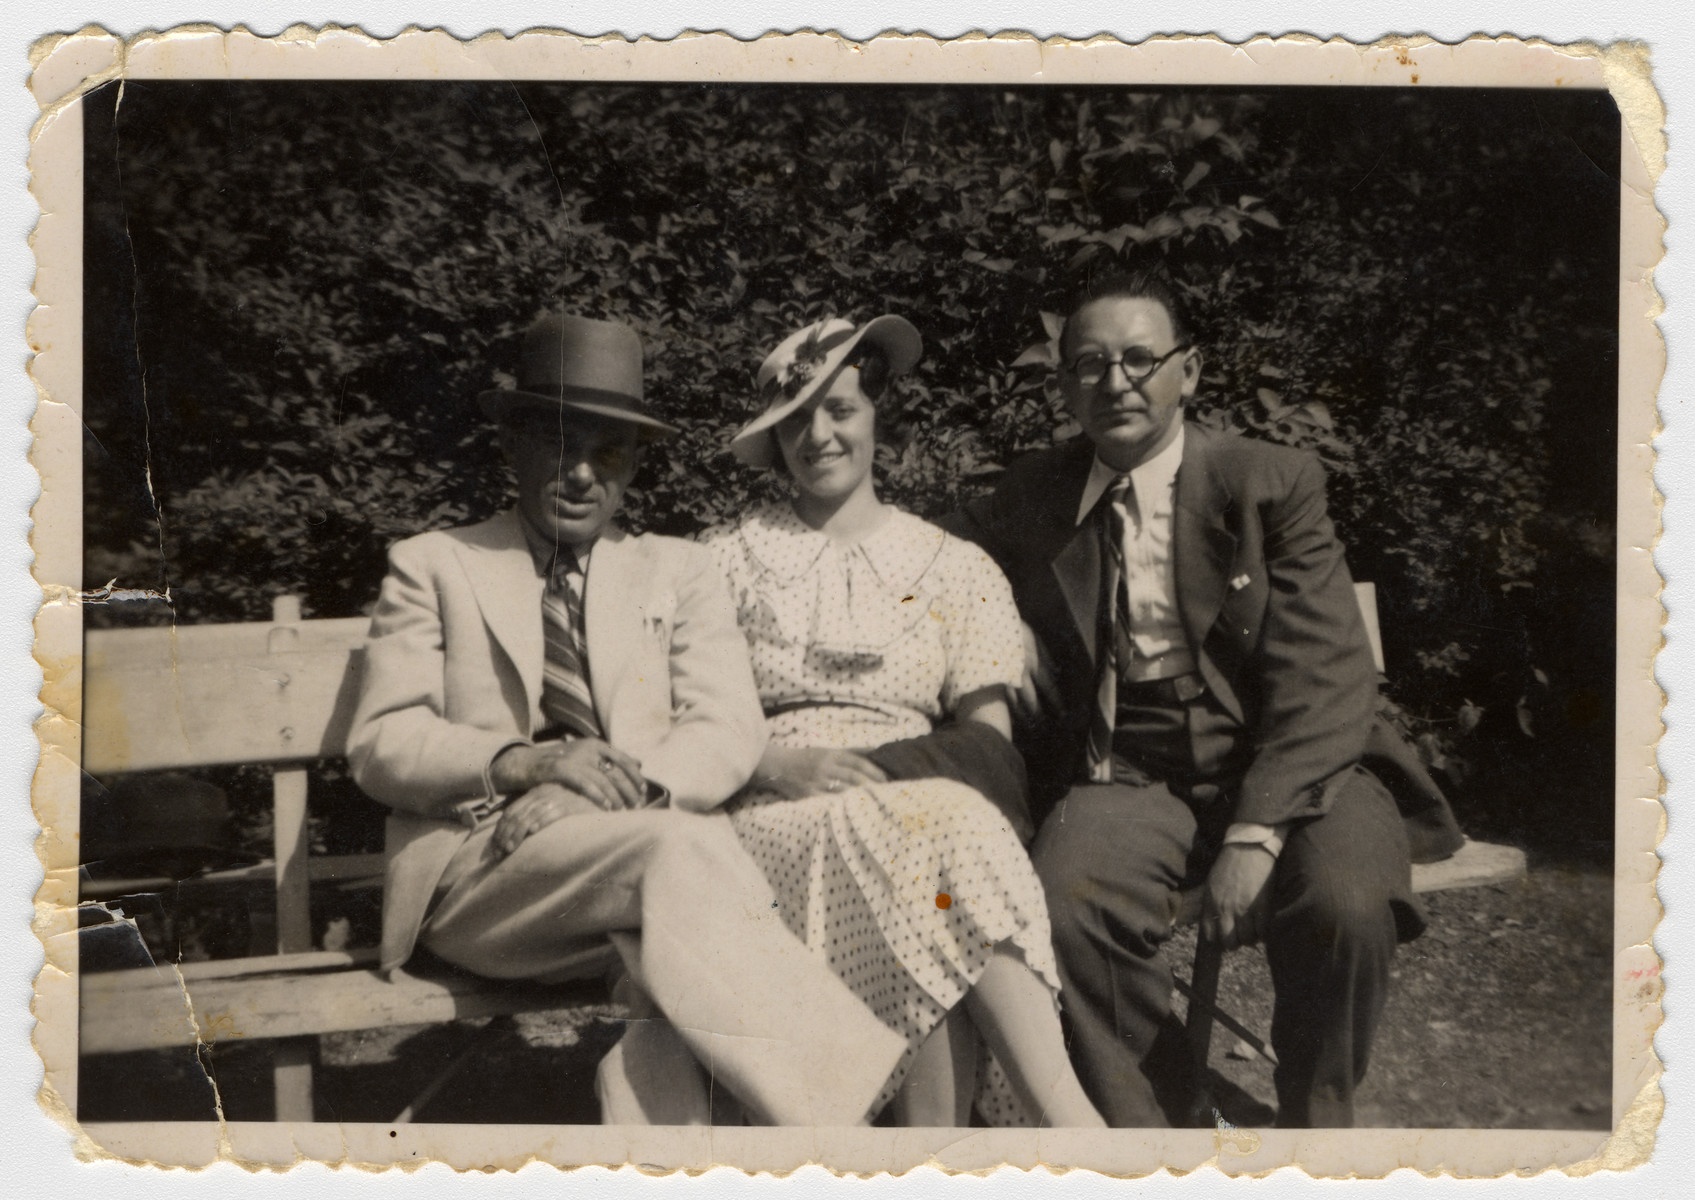 Three Hungarian Jews sit on a park bench in Budapest.

Pictured on the far right is Izso Stern.